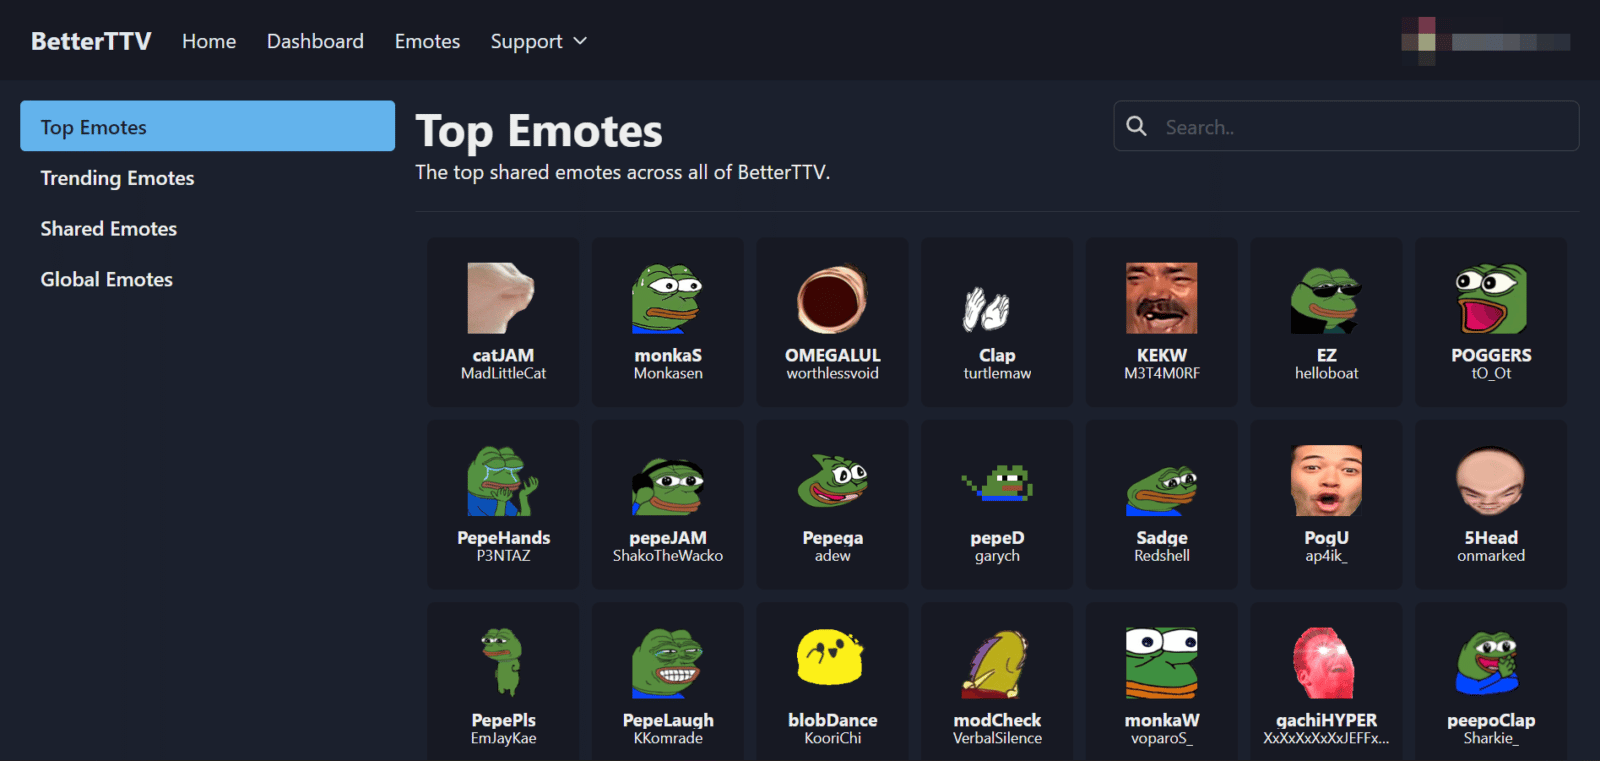 Do twitch emotes for your channel by Dtowncat